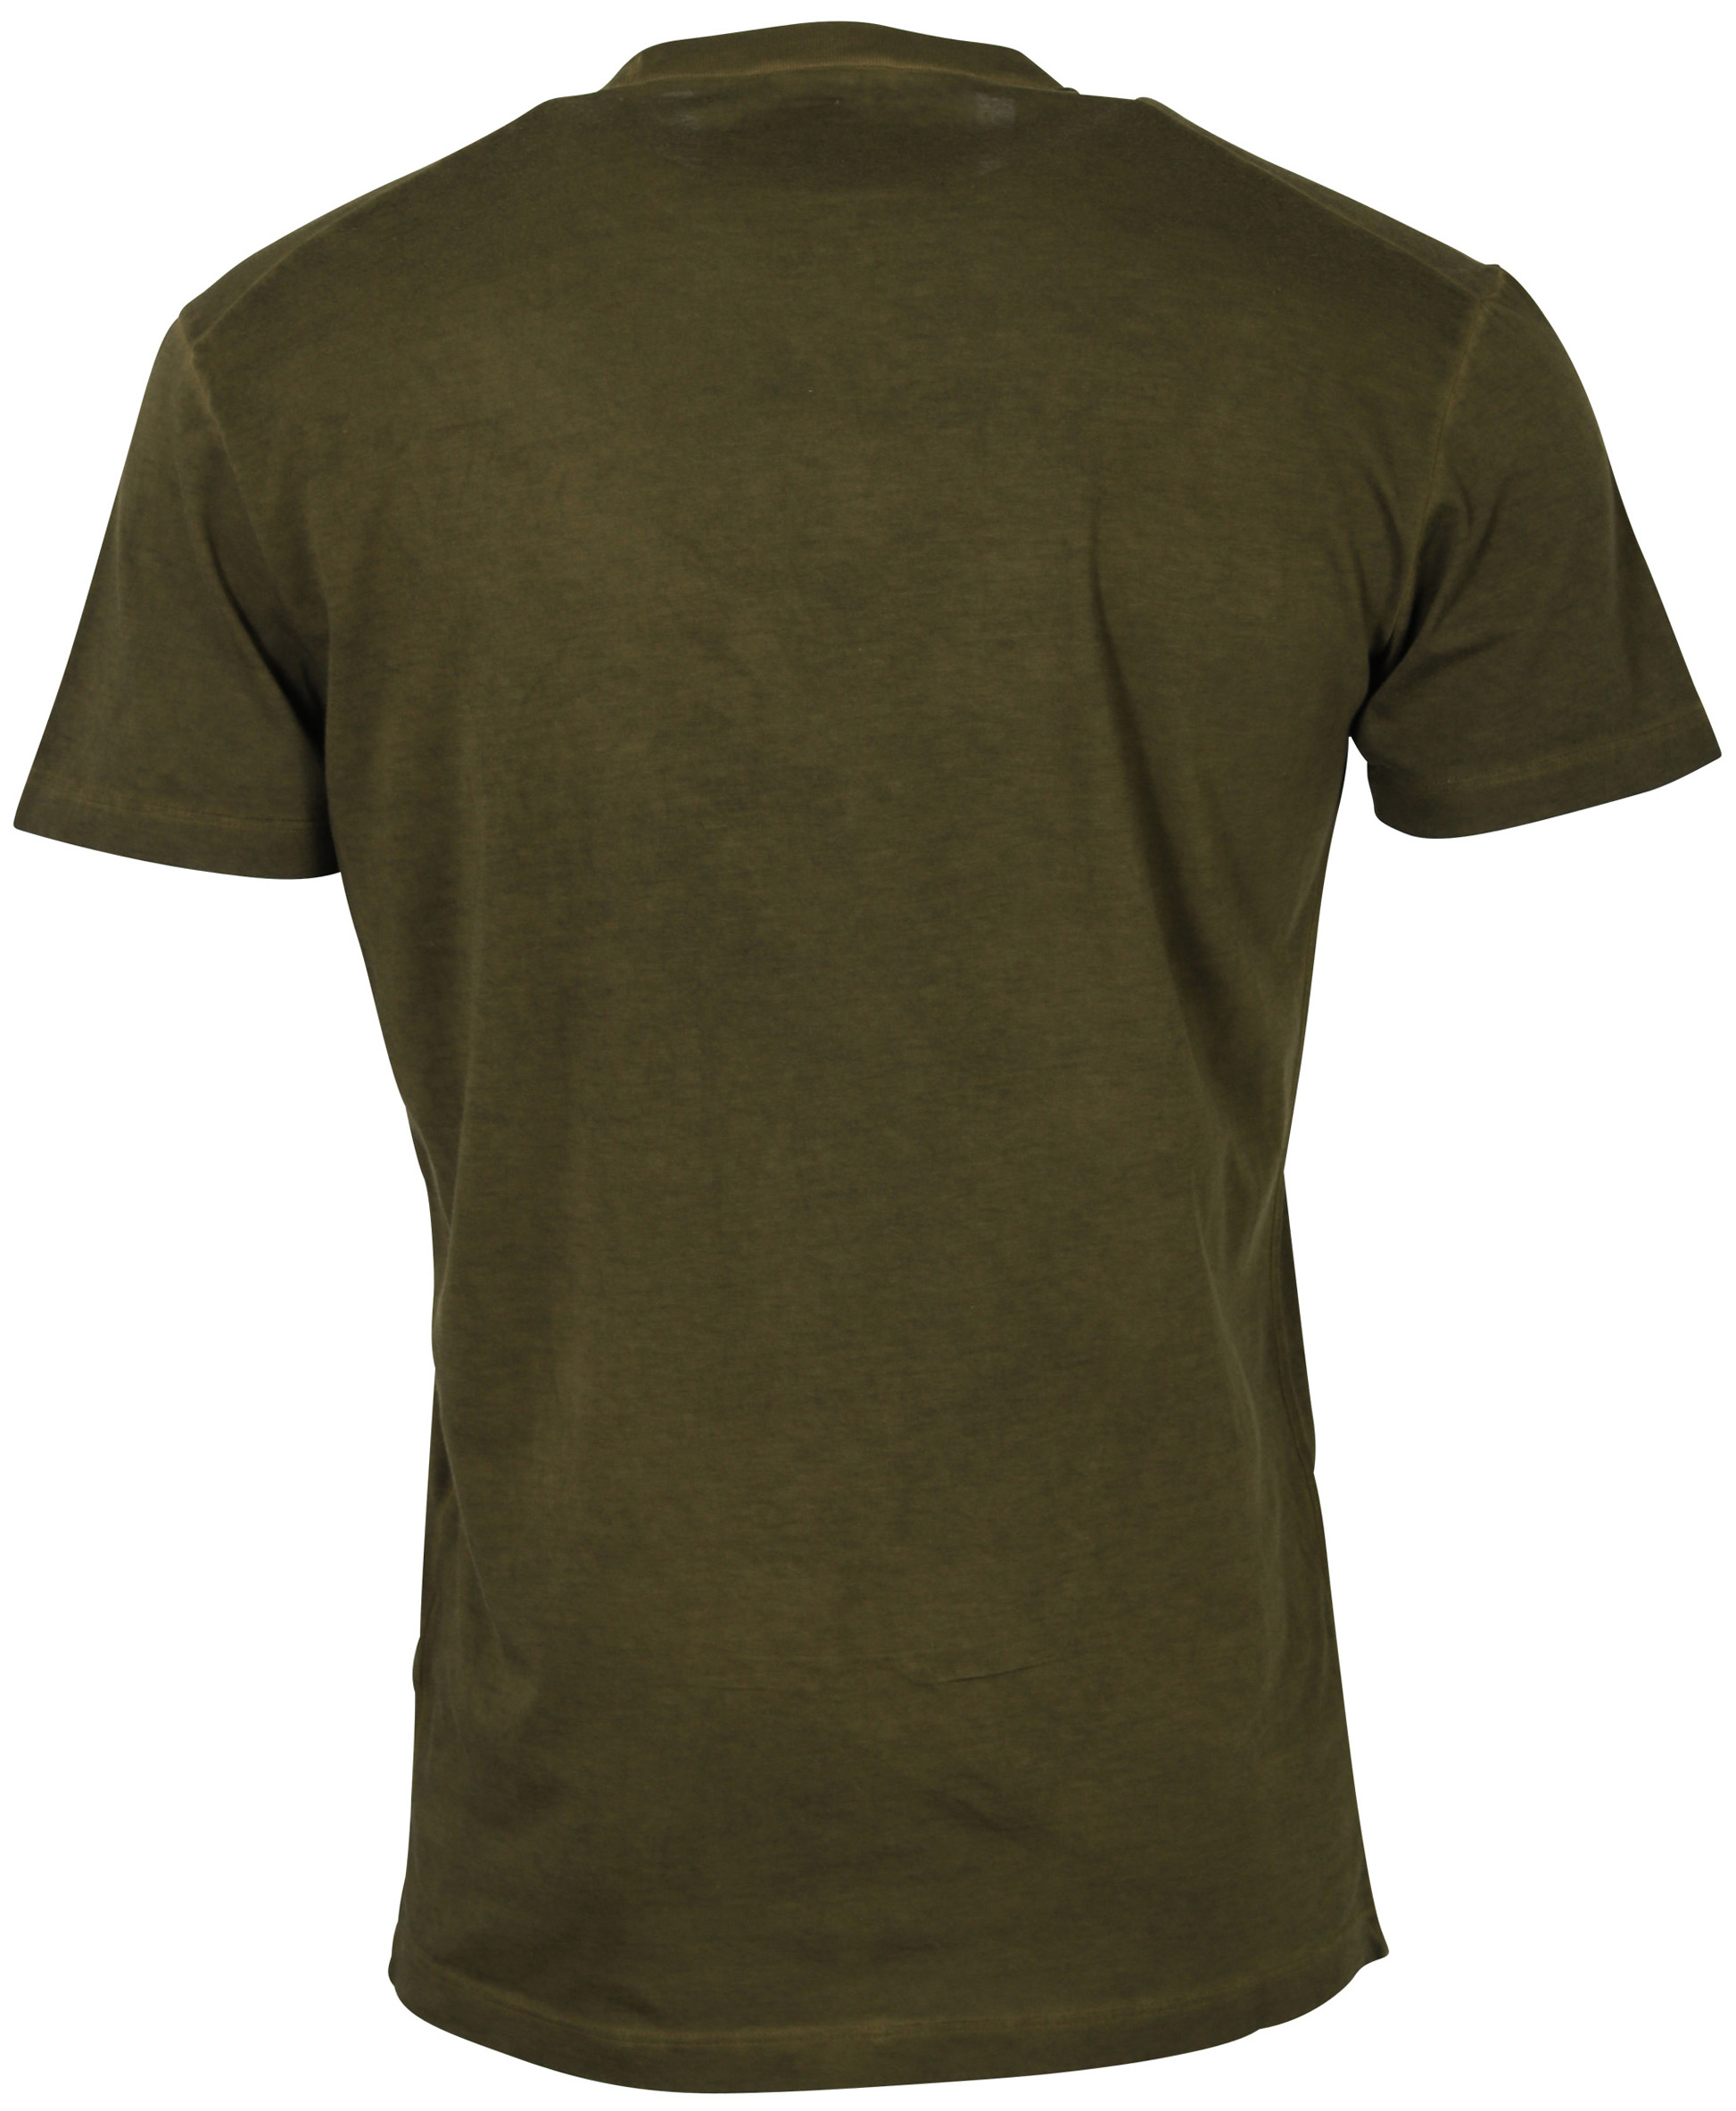 Dsquared T-Shirt Olive Printed XL